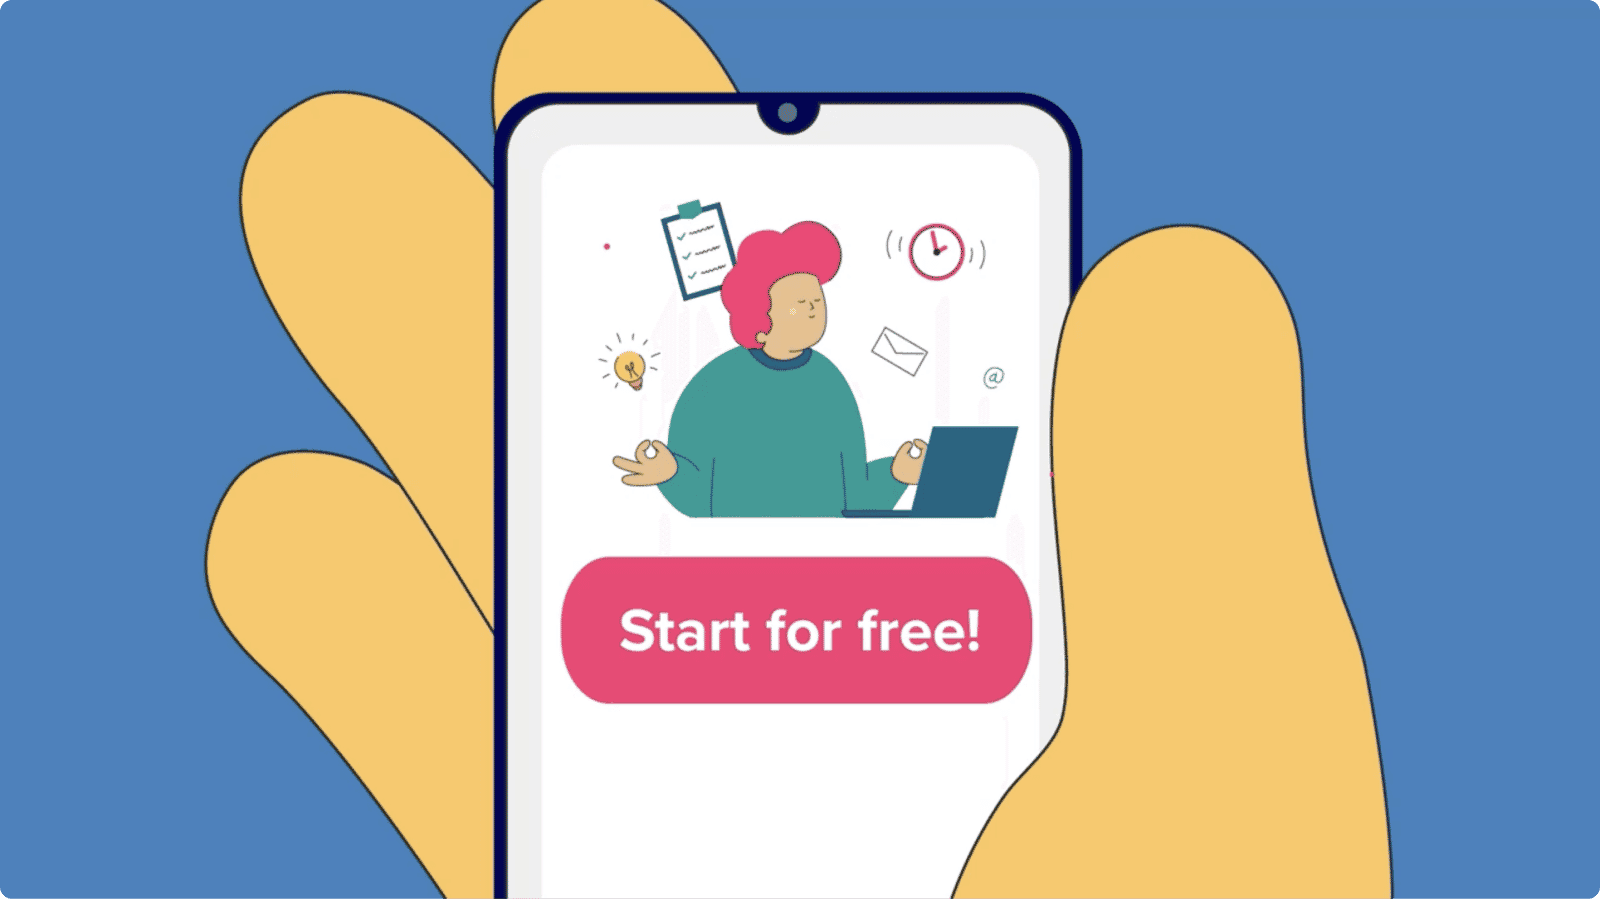 Illustration of a hand holding a phone with F4S start for free screen on the phone